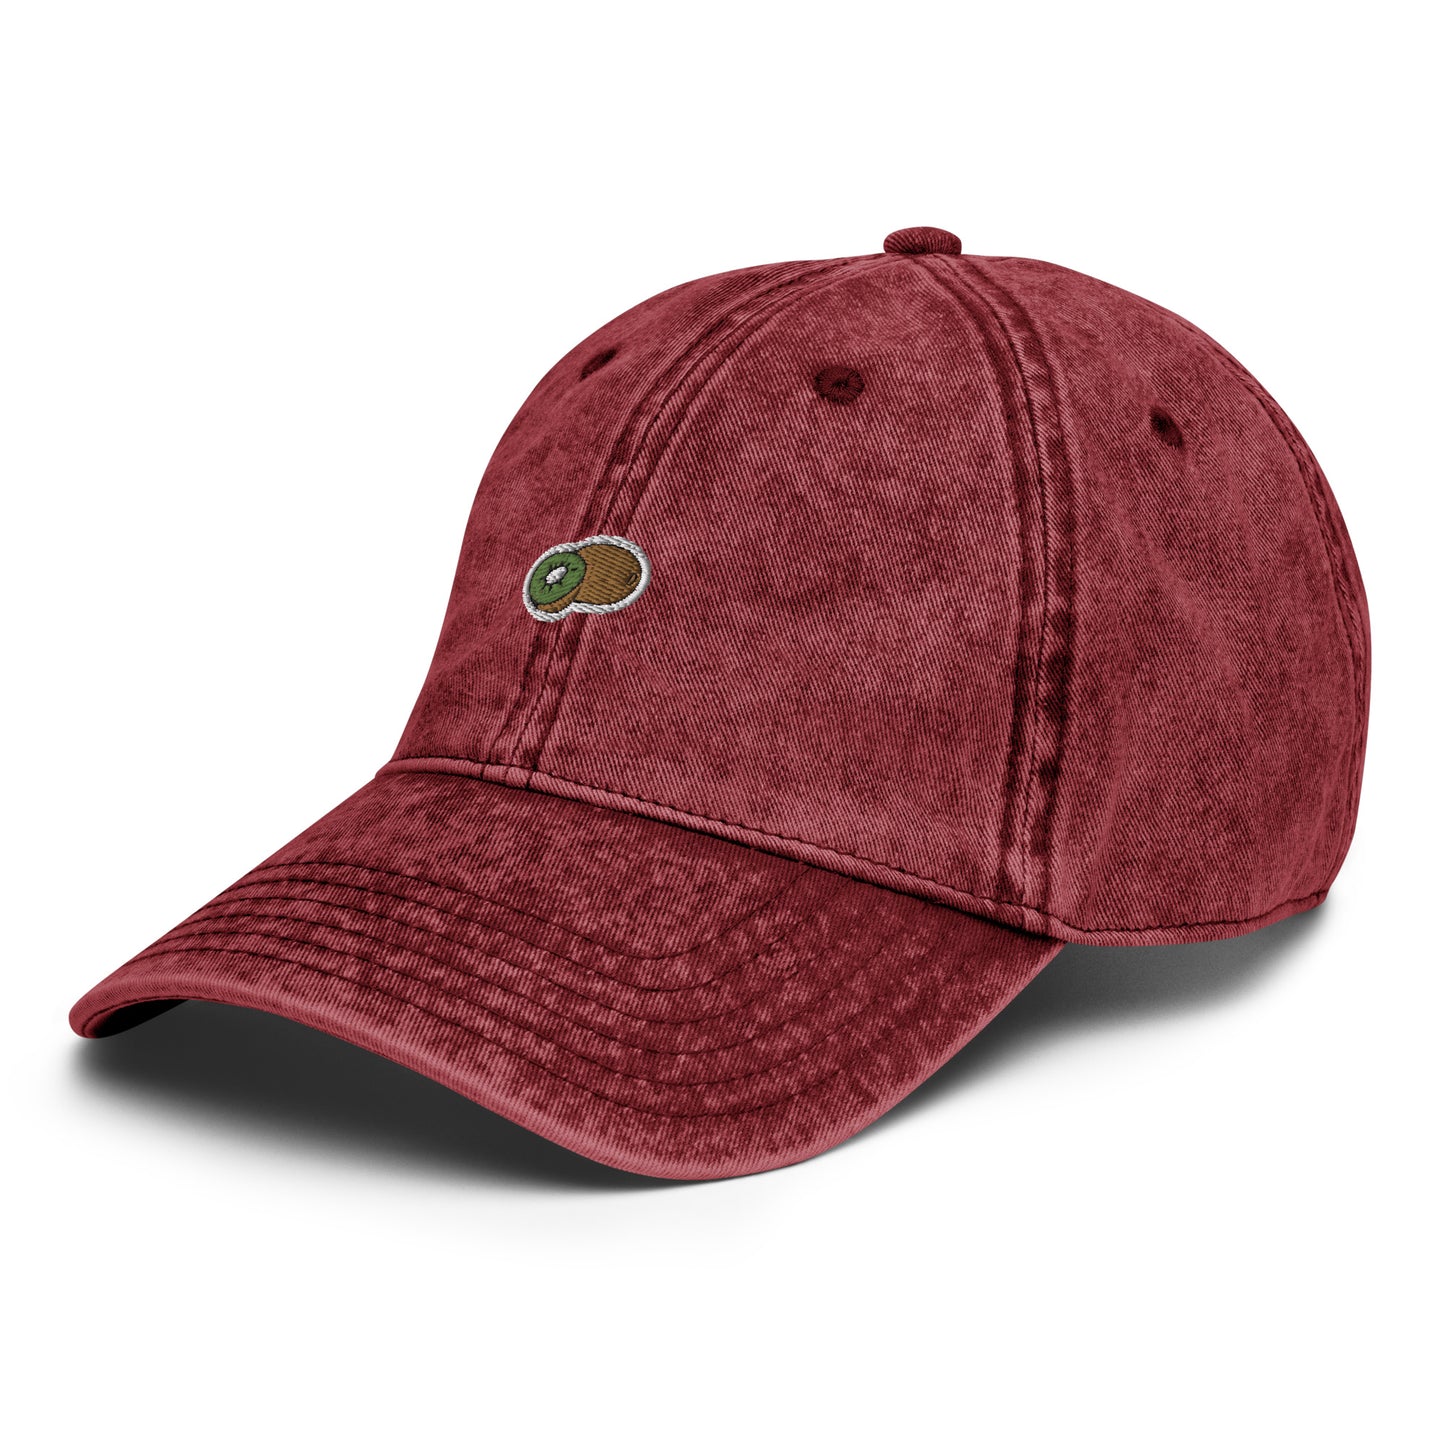 cap-from-the-front-with-kiwi-symbol